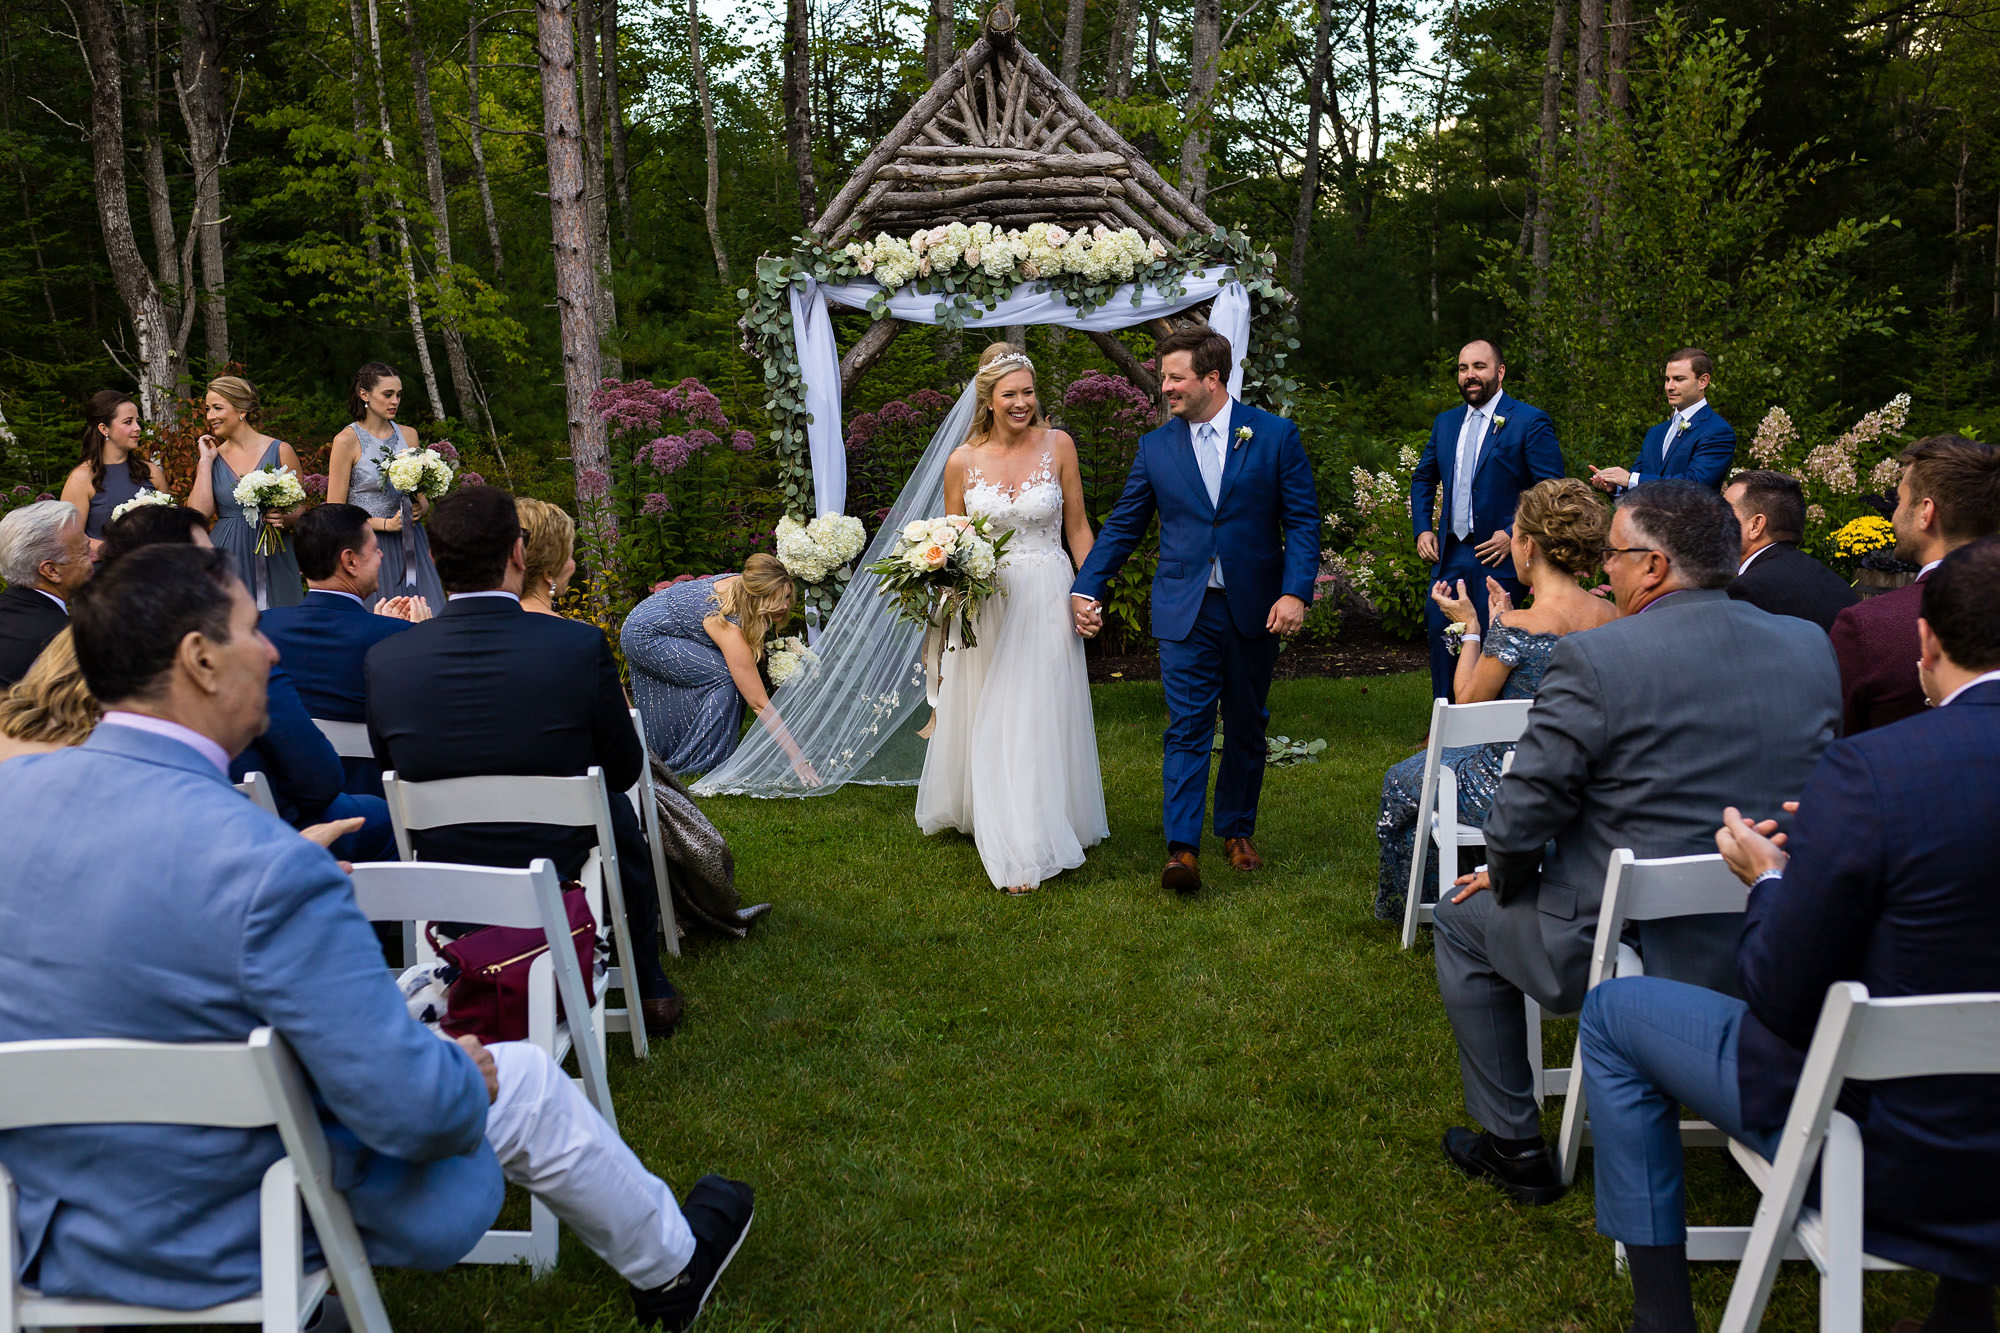 Candid wedding photos of a Hidden Pond wedding ceremony in southern Maine